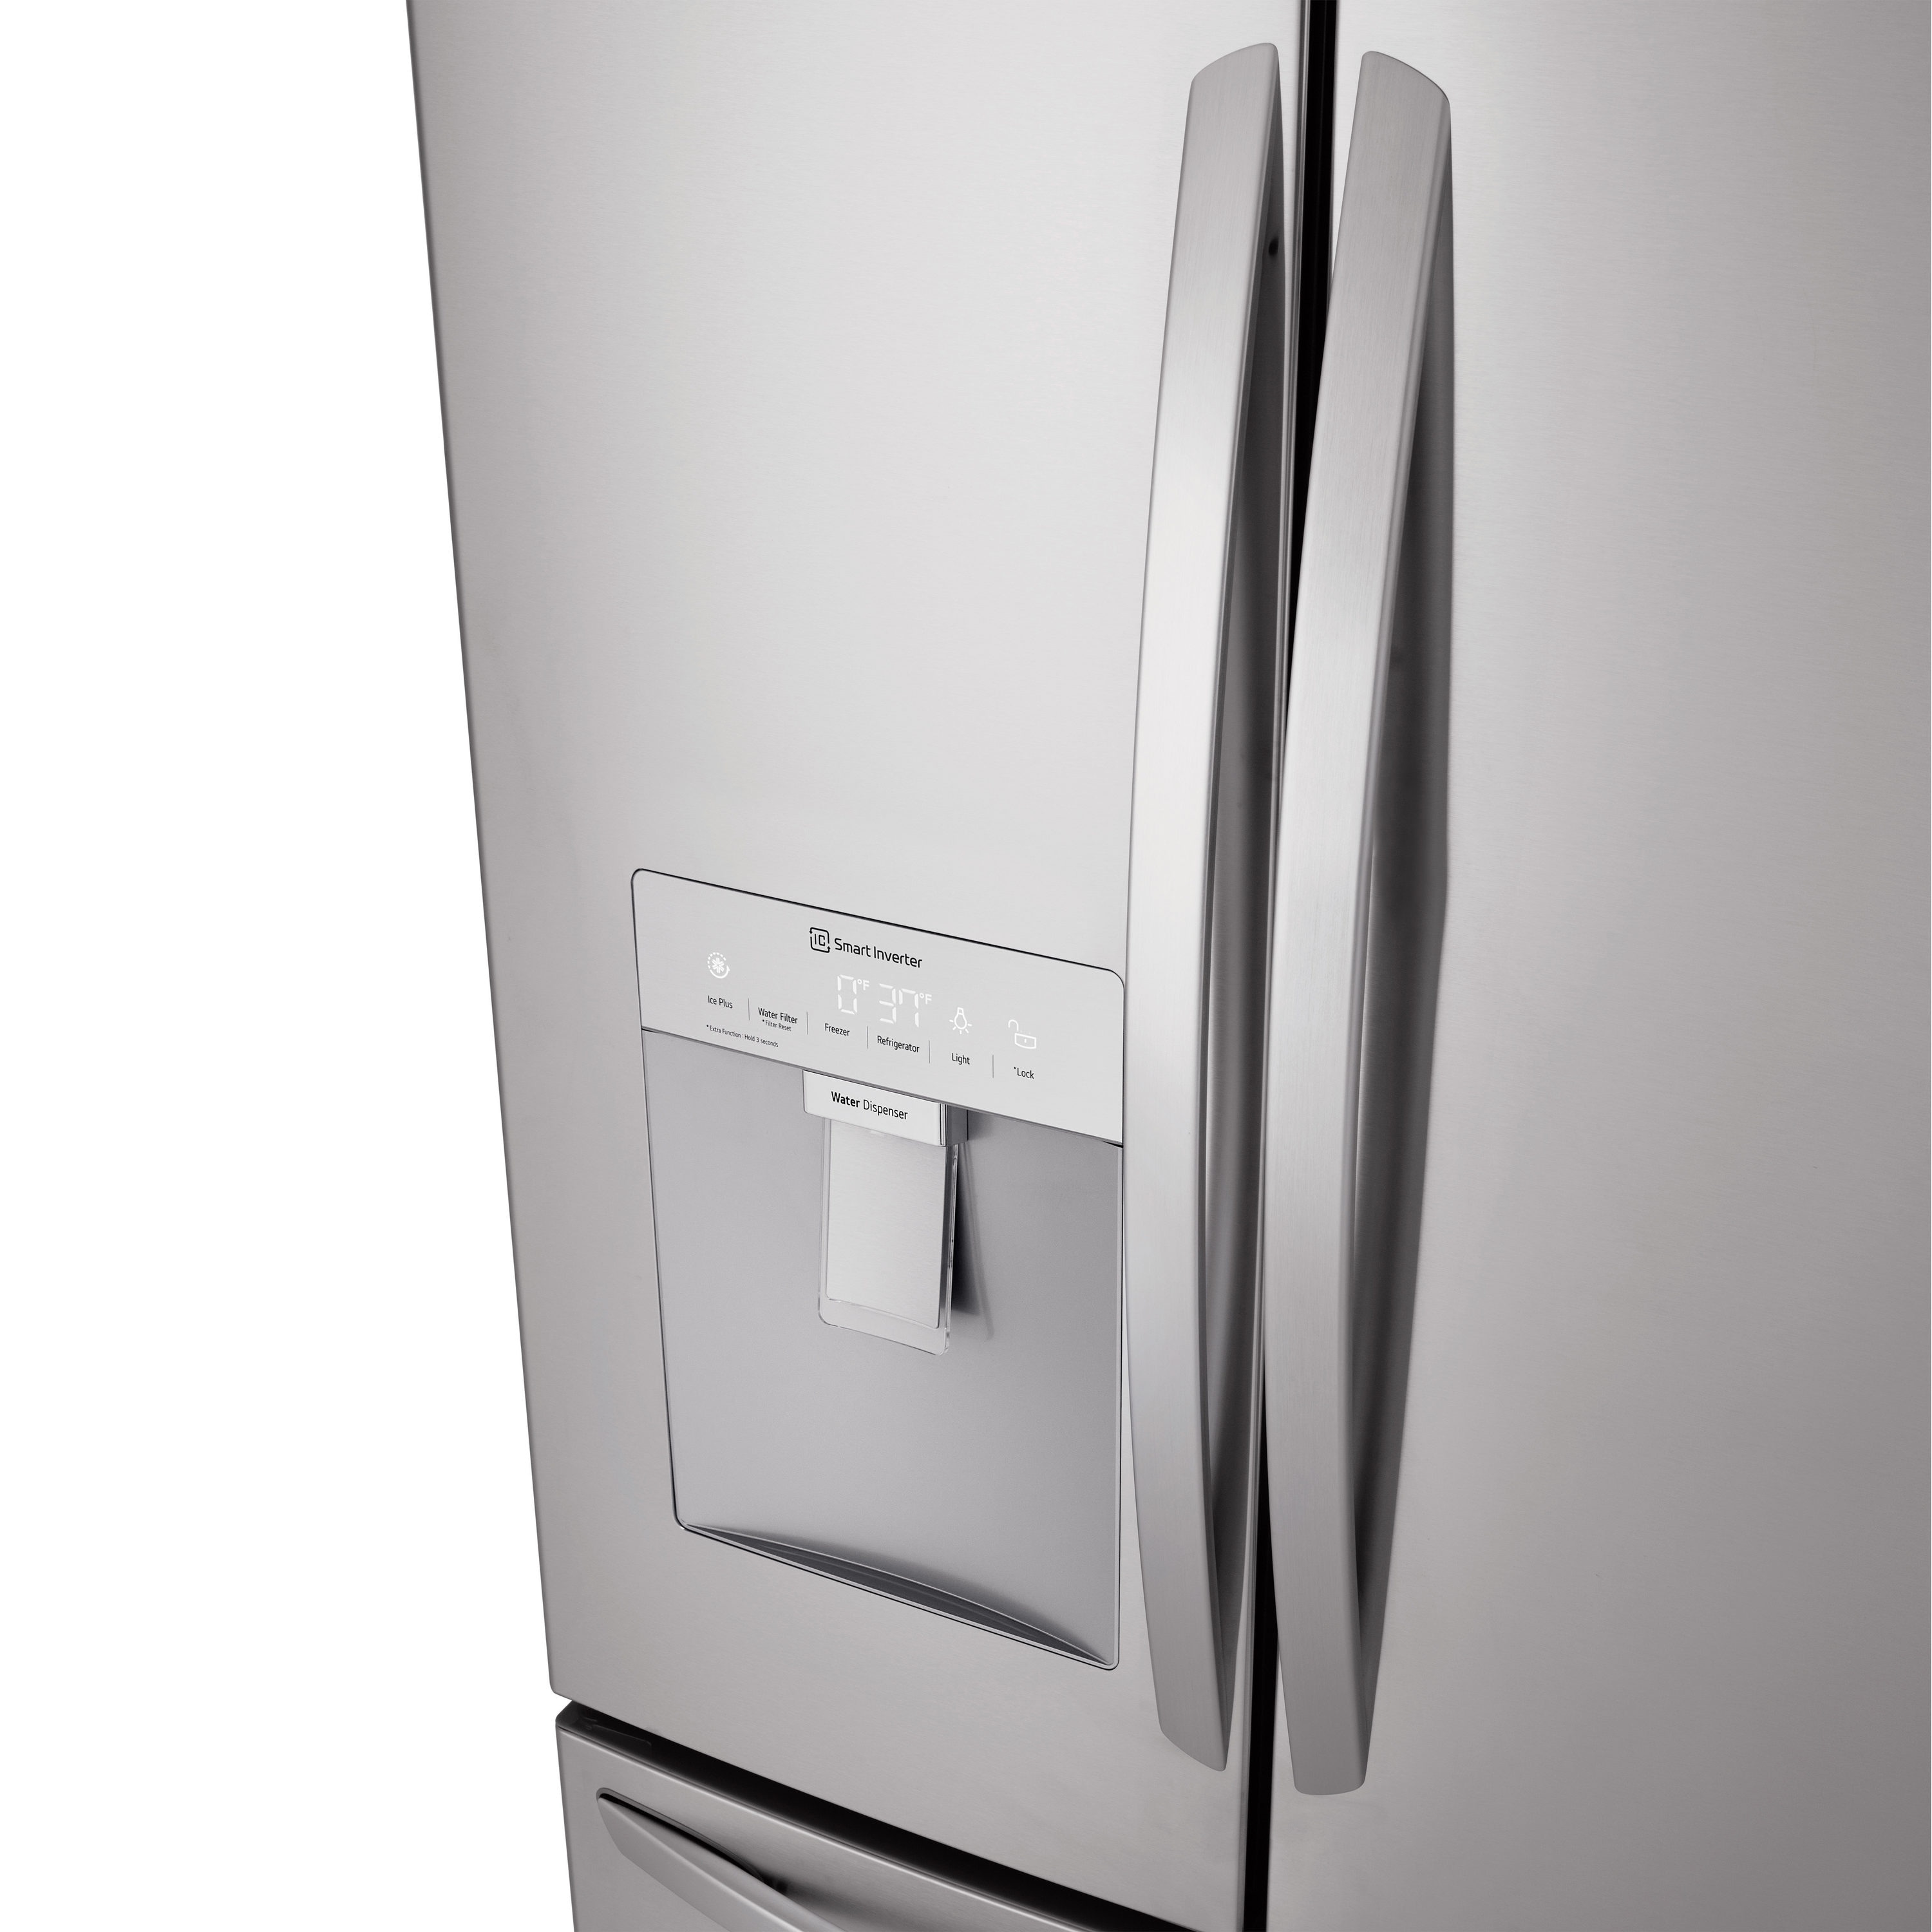 LRMWS2906S by LG - 29 cu. ft. French Door Refrigerator with Slim Design  Water Dispenser